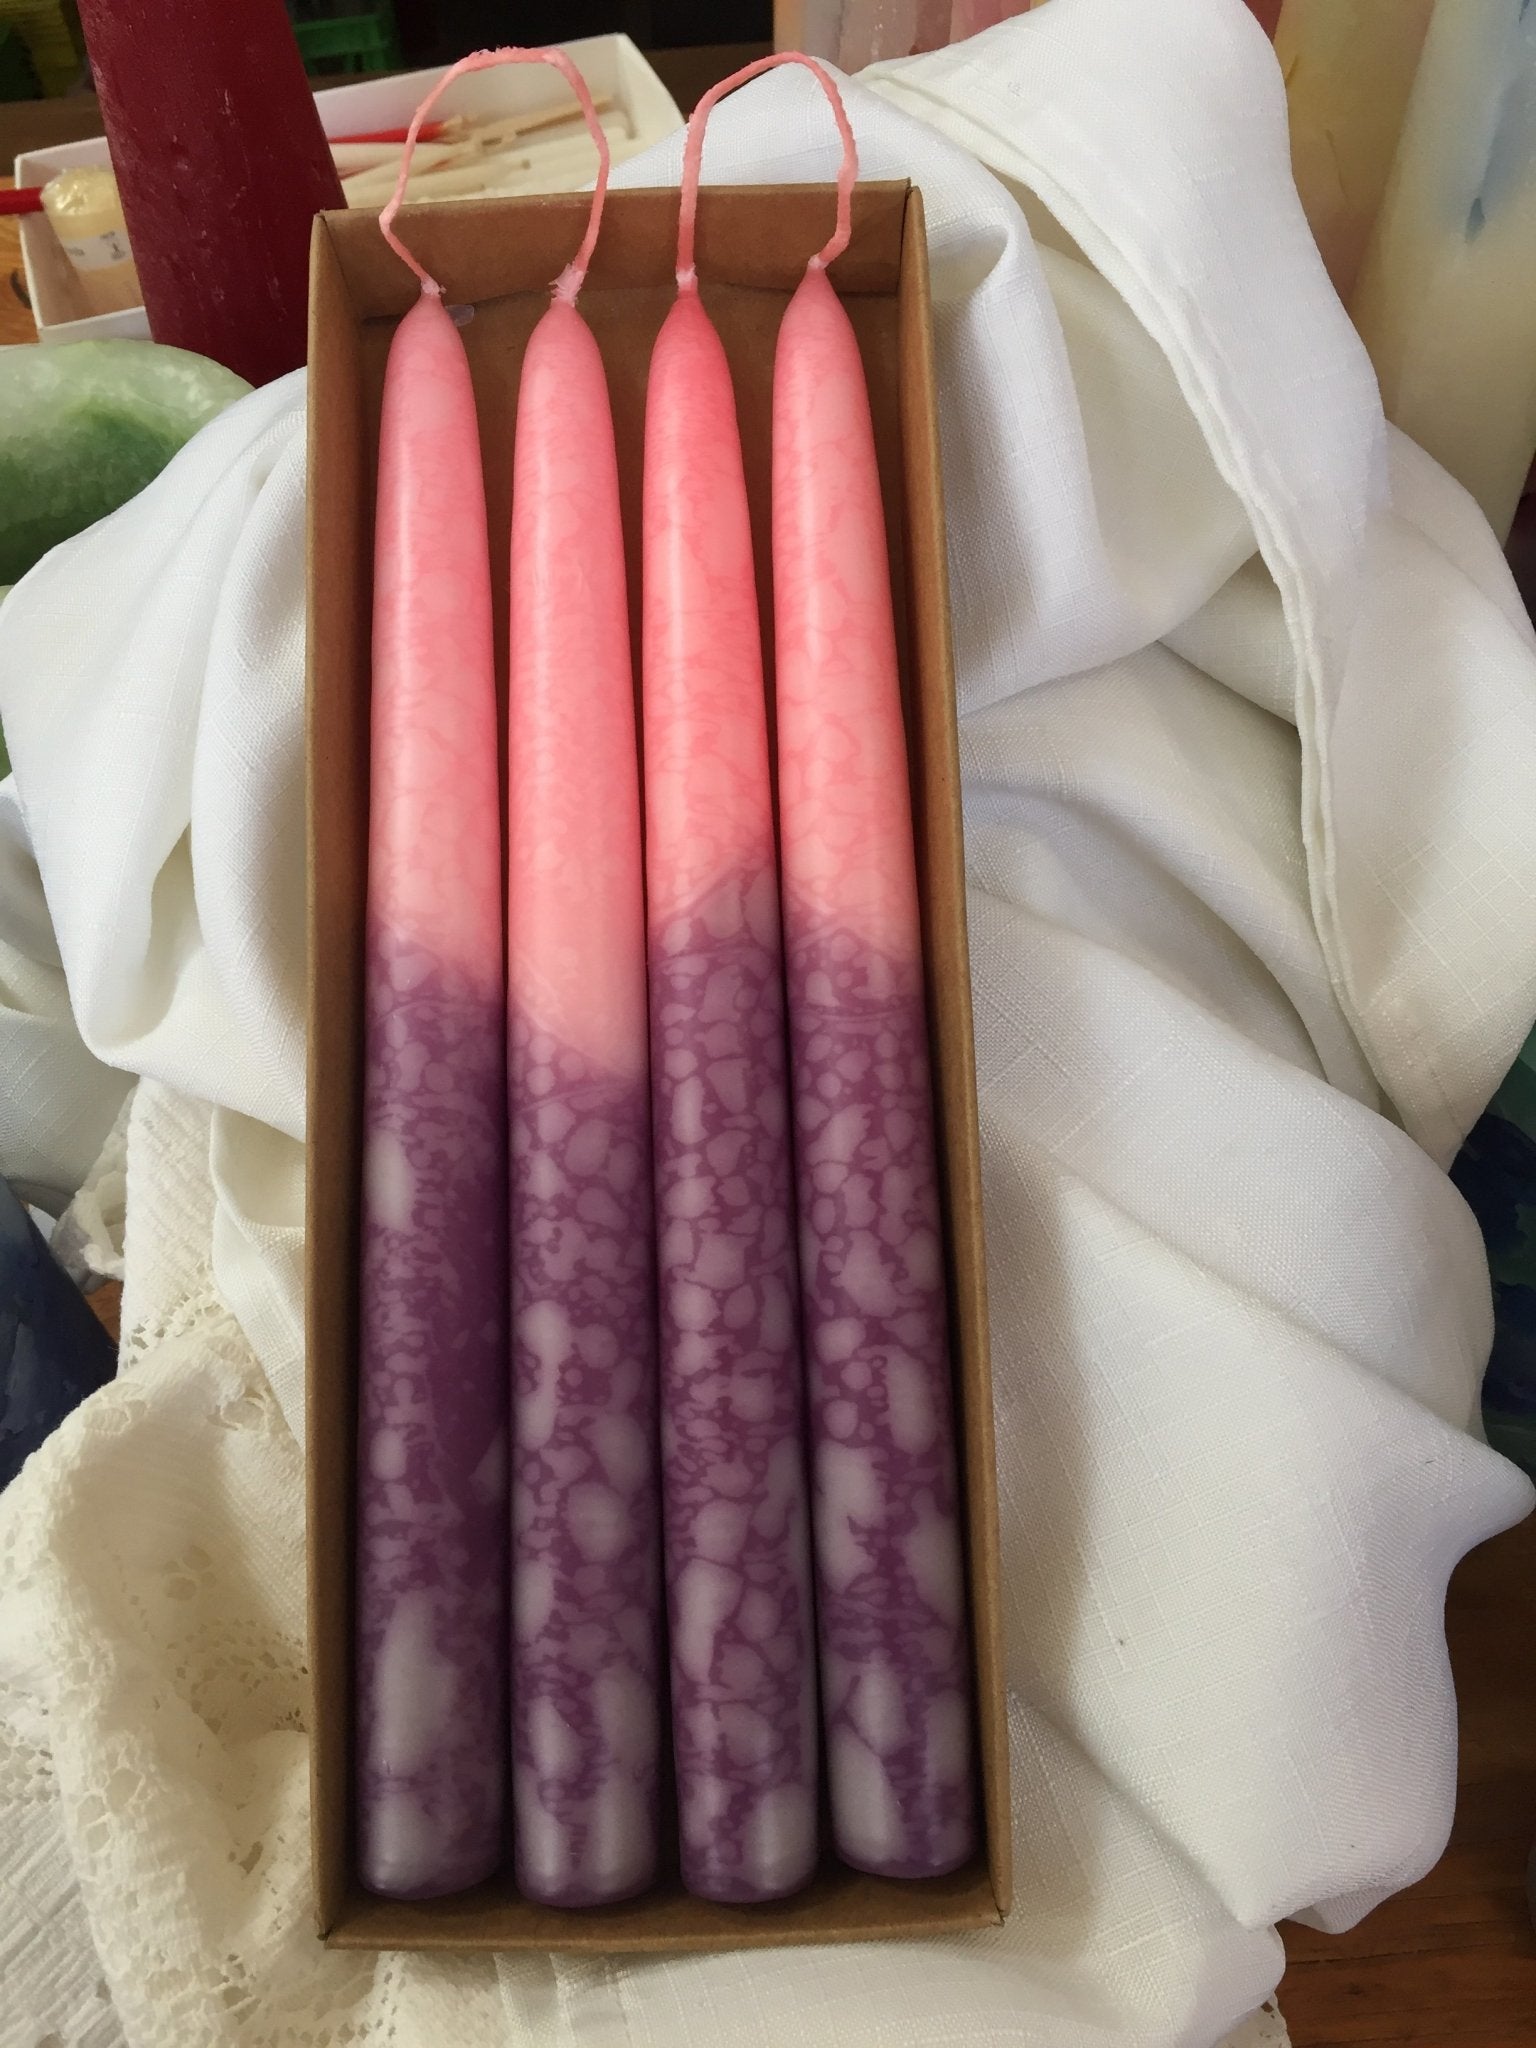 Artisan Multi-Coloured taper candles, grey and dark blue - Fanny Bay Candle Company